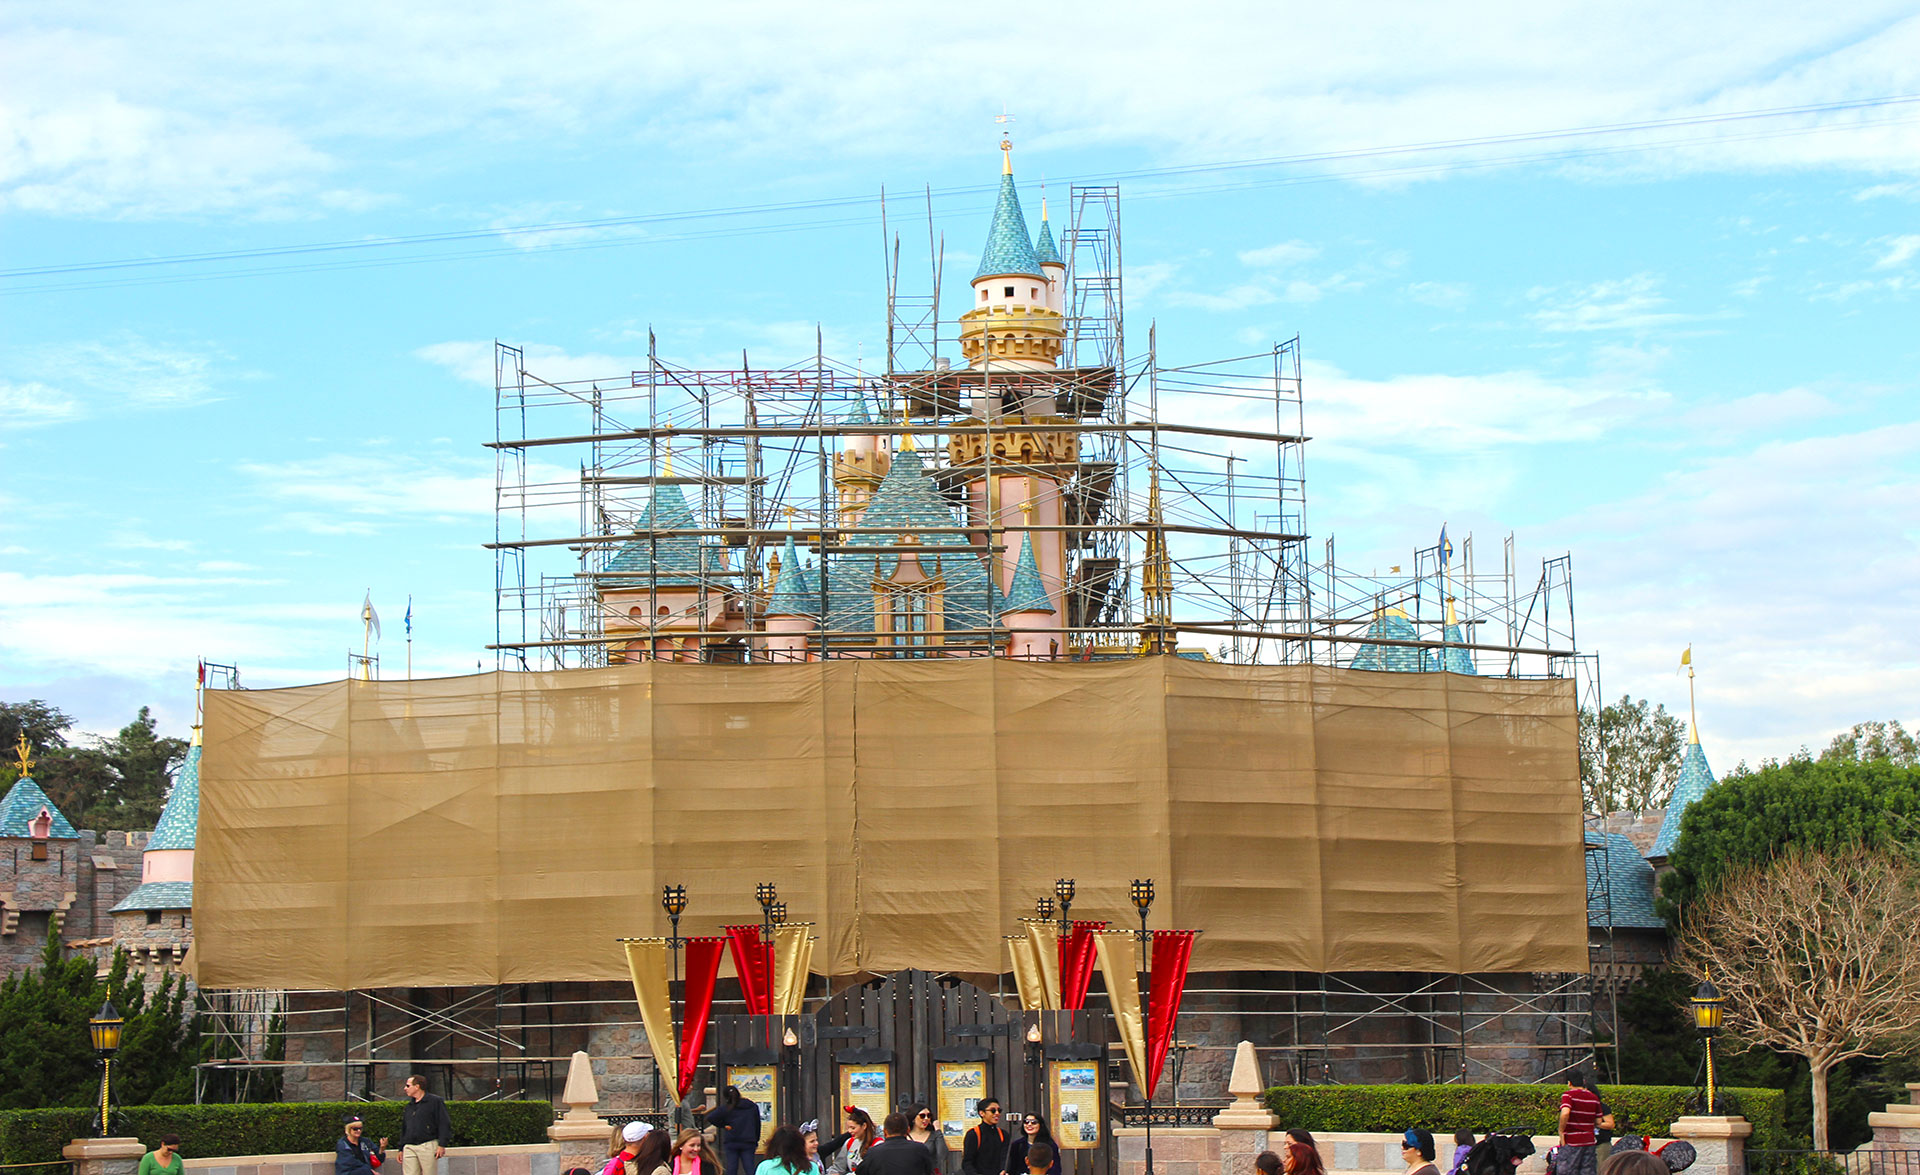 The iconic Sleeping Beauty Castle is covered and under construction in preparation for Disneyland's 60th anniversary in July. The castle is one of the most visited and photographed landmarks in the park, and is a big surprise to guests who haven't researched attraction closures.  